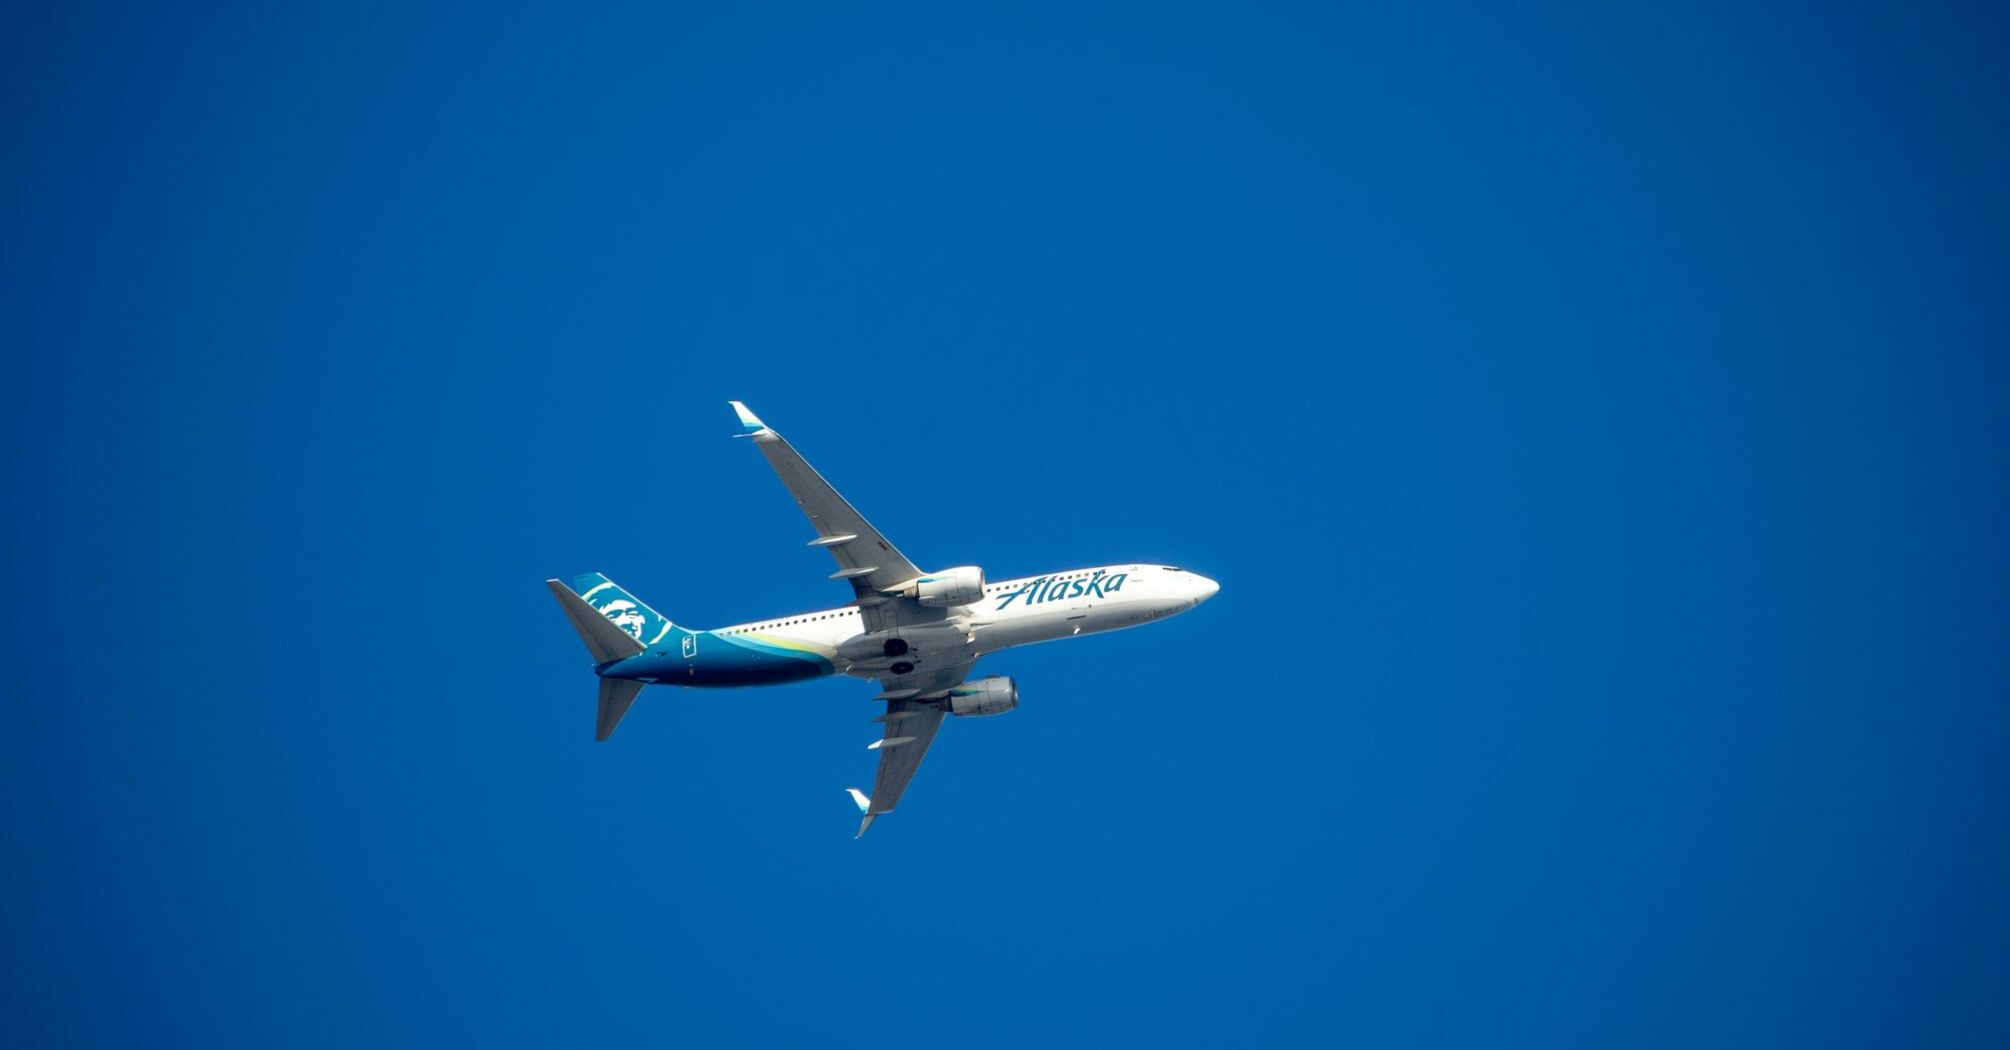 A blue and white airplane flying in a blue sky